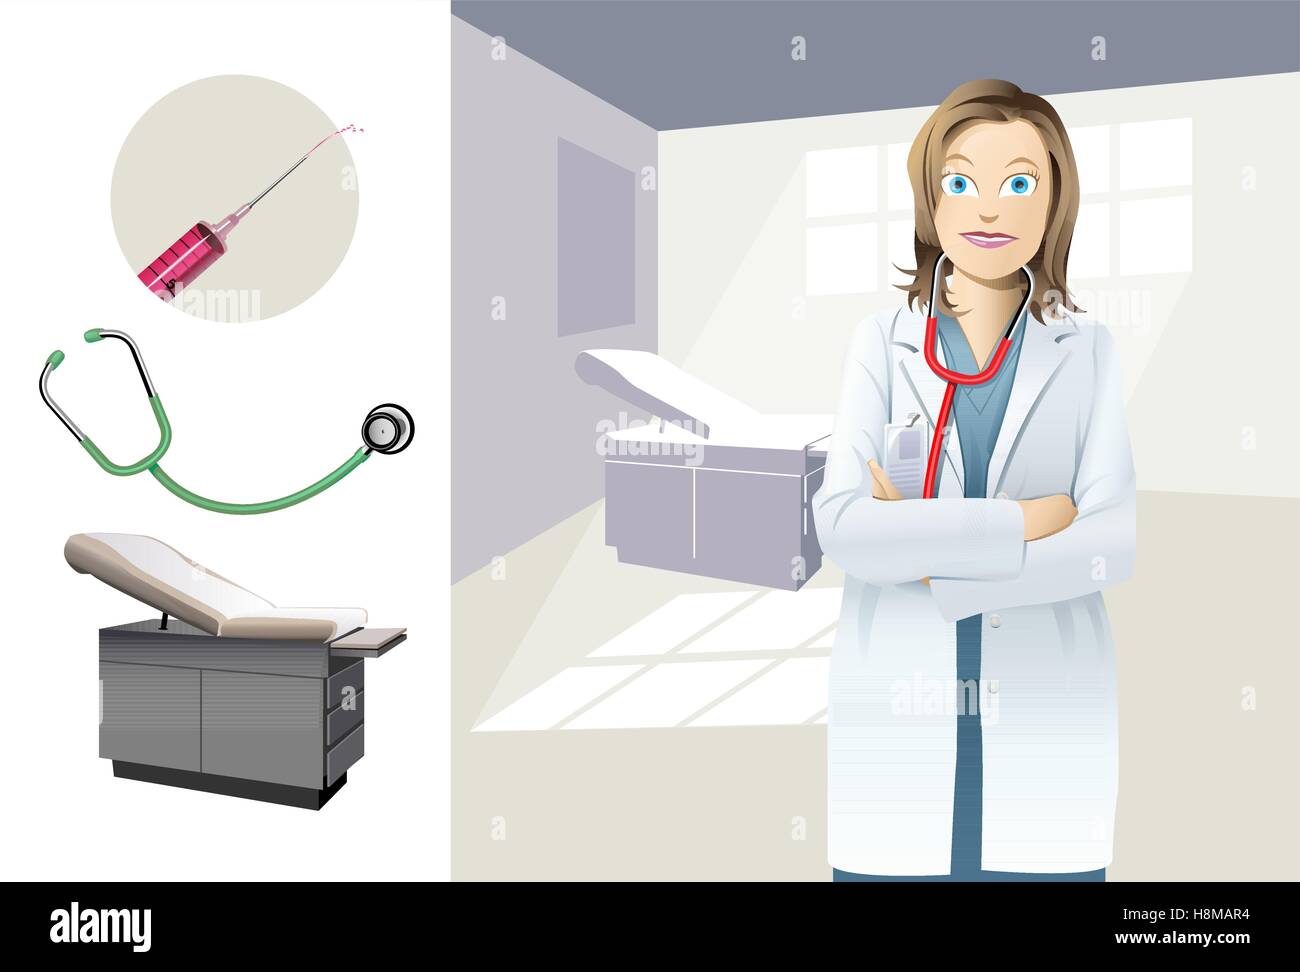 A female doctor wearing a white coat and stethoscope in a examination room. A syringe, stethoscope and examination chair Stock Vector